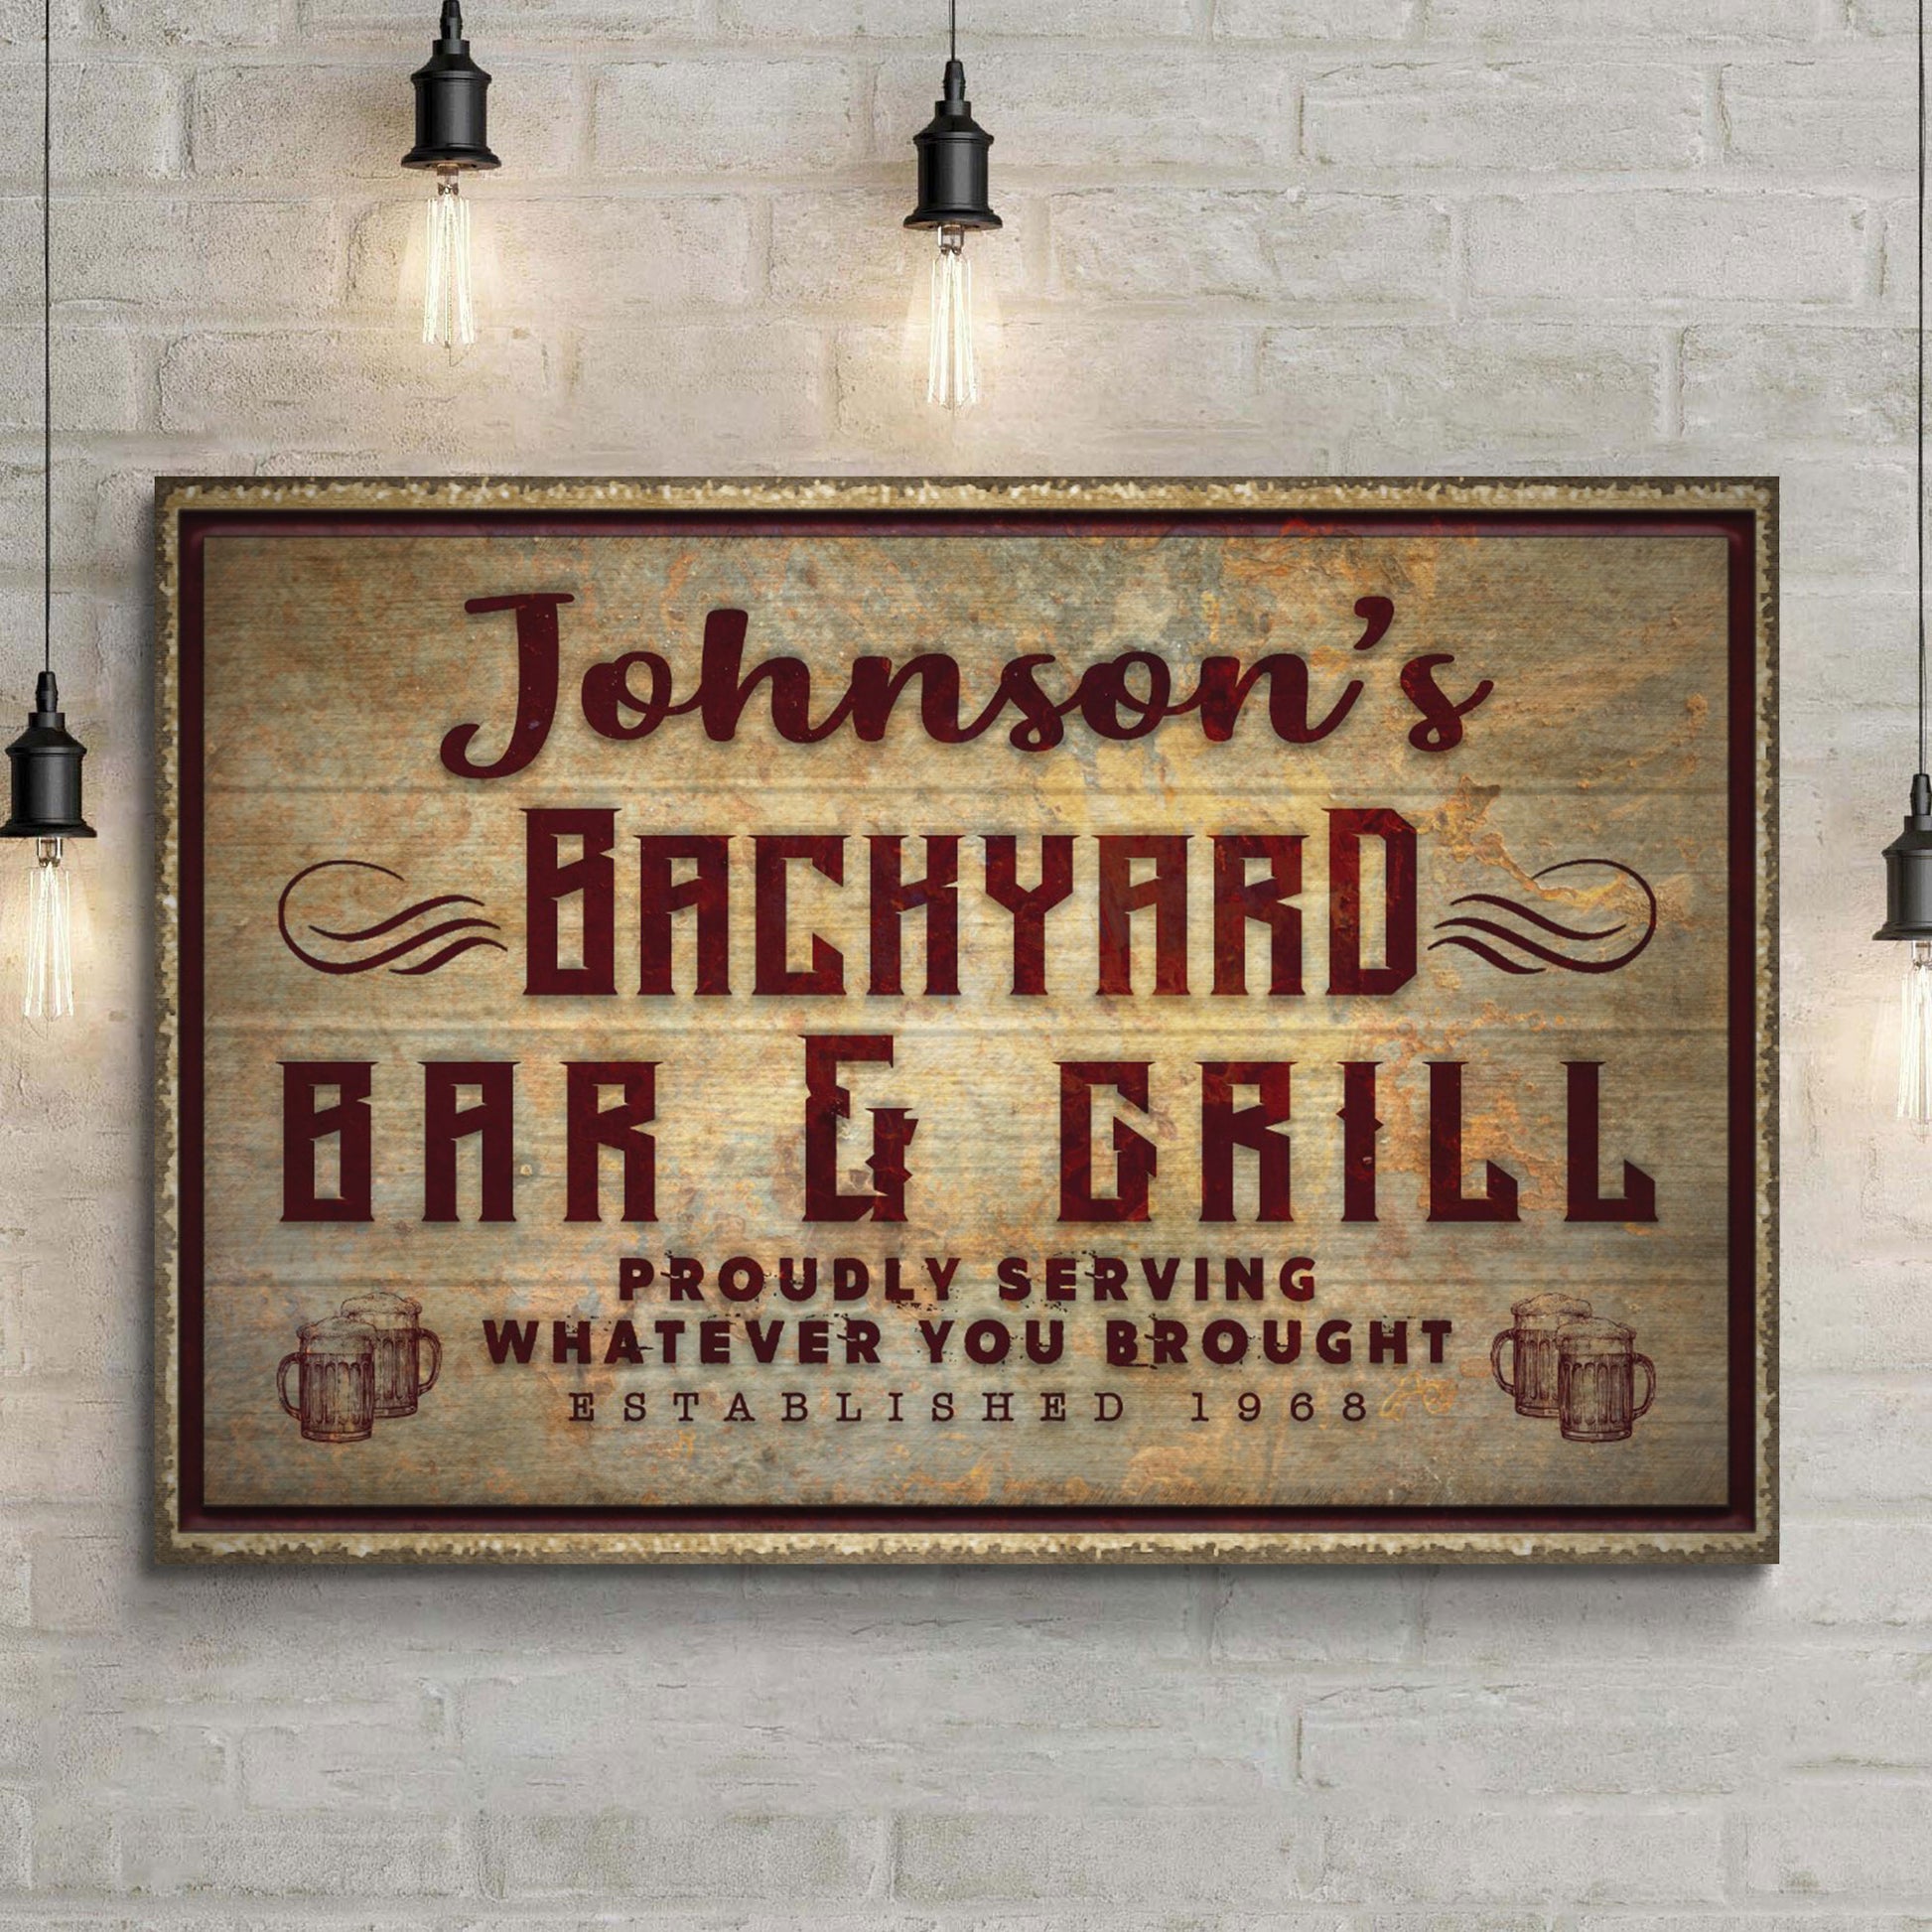 Backyard Bar & Grill Sign VII - Image by Tailored Canvases